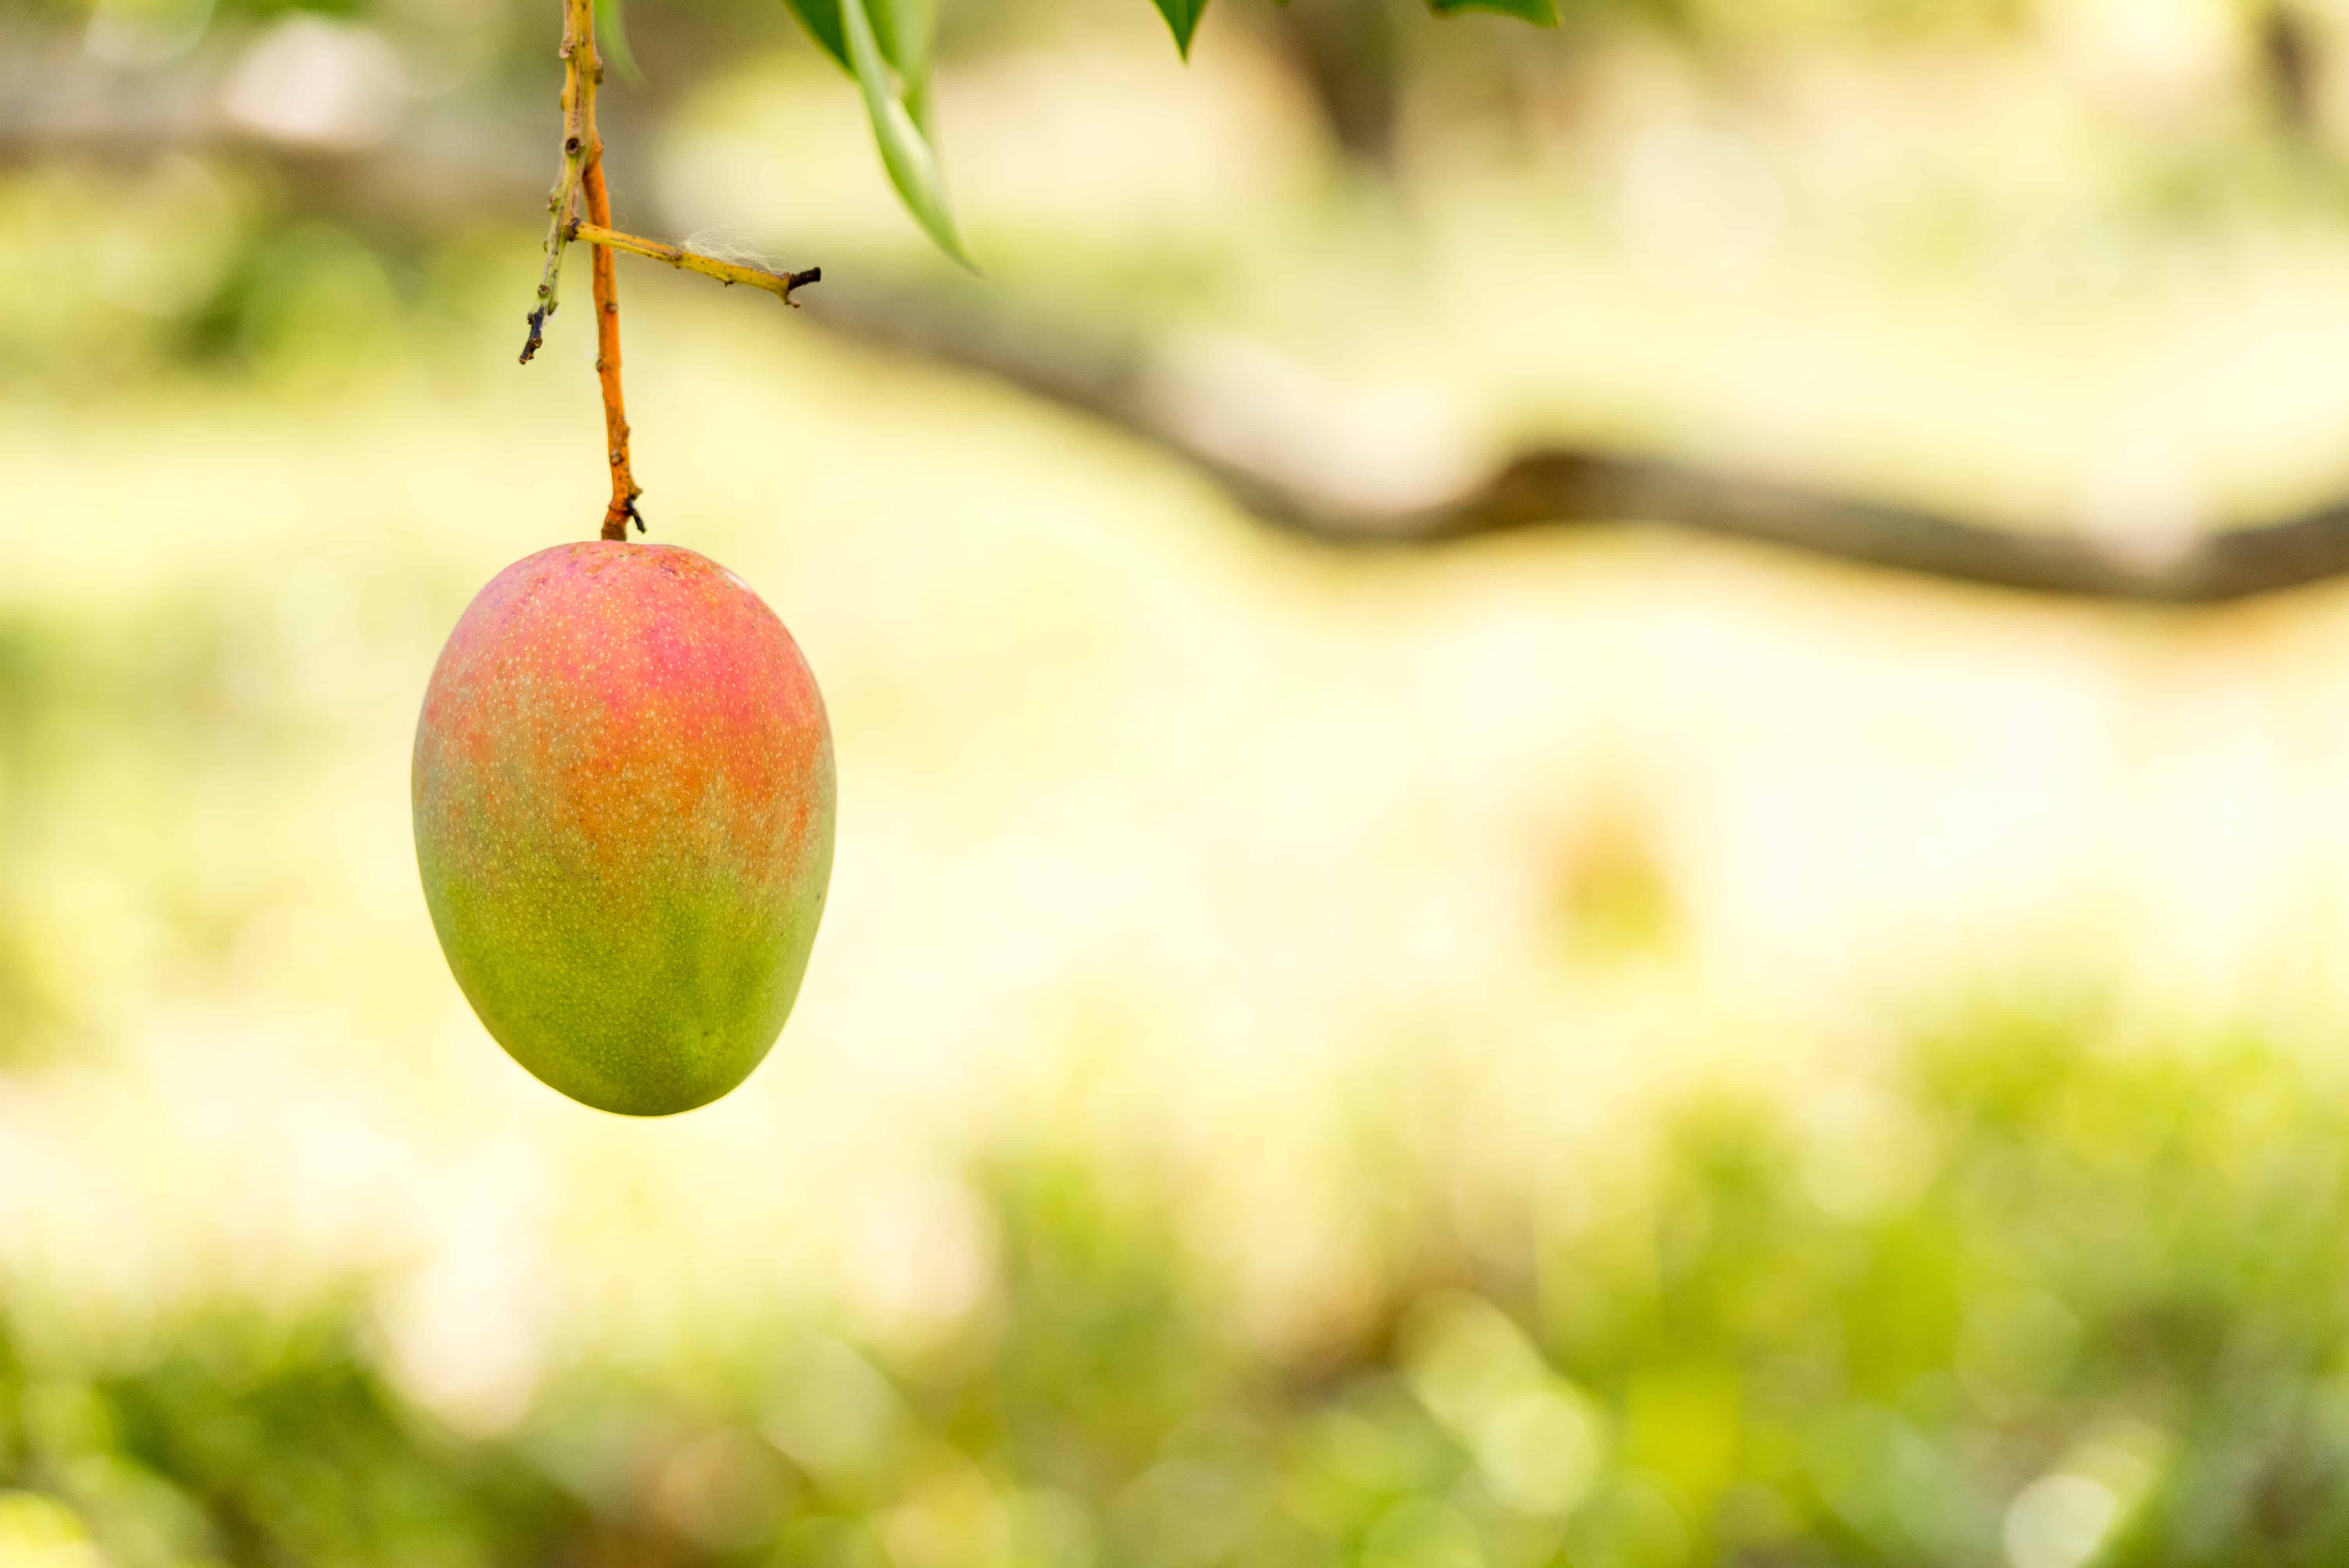 Mango on a tree branch with a blurred outdoors background with greenery.